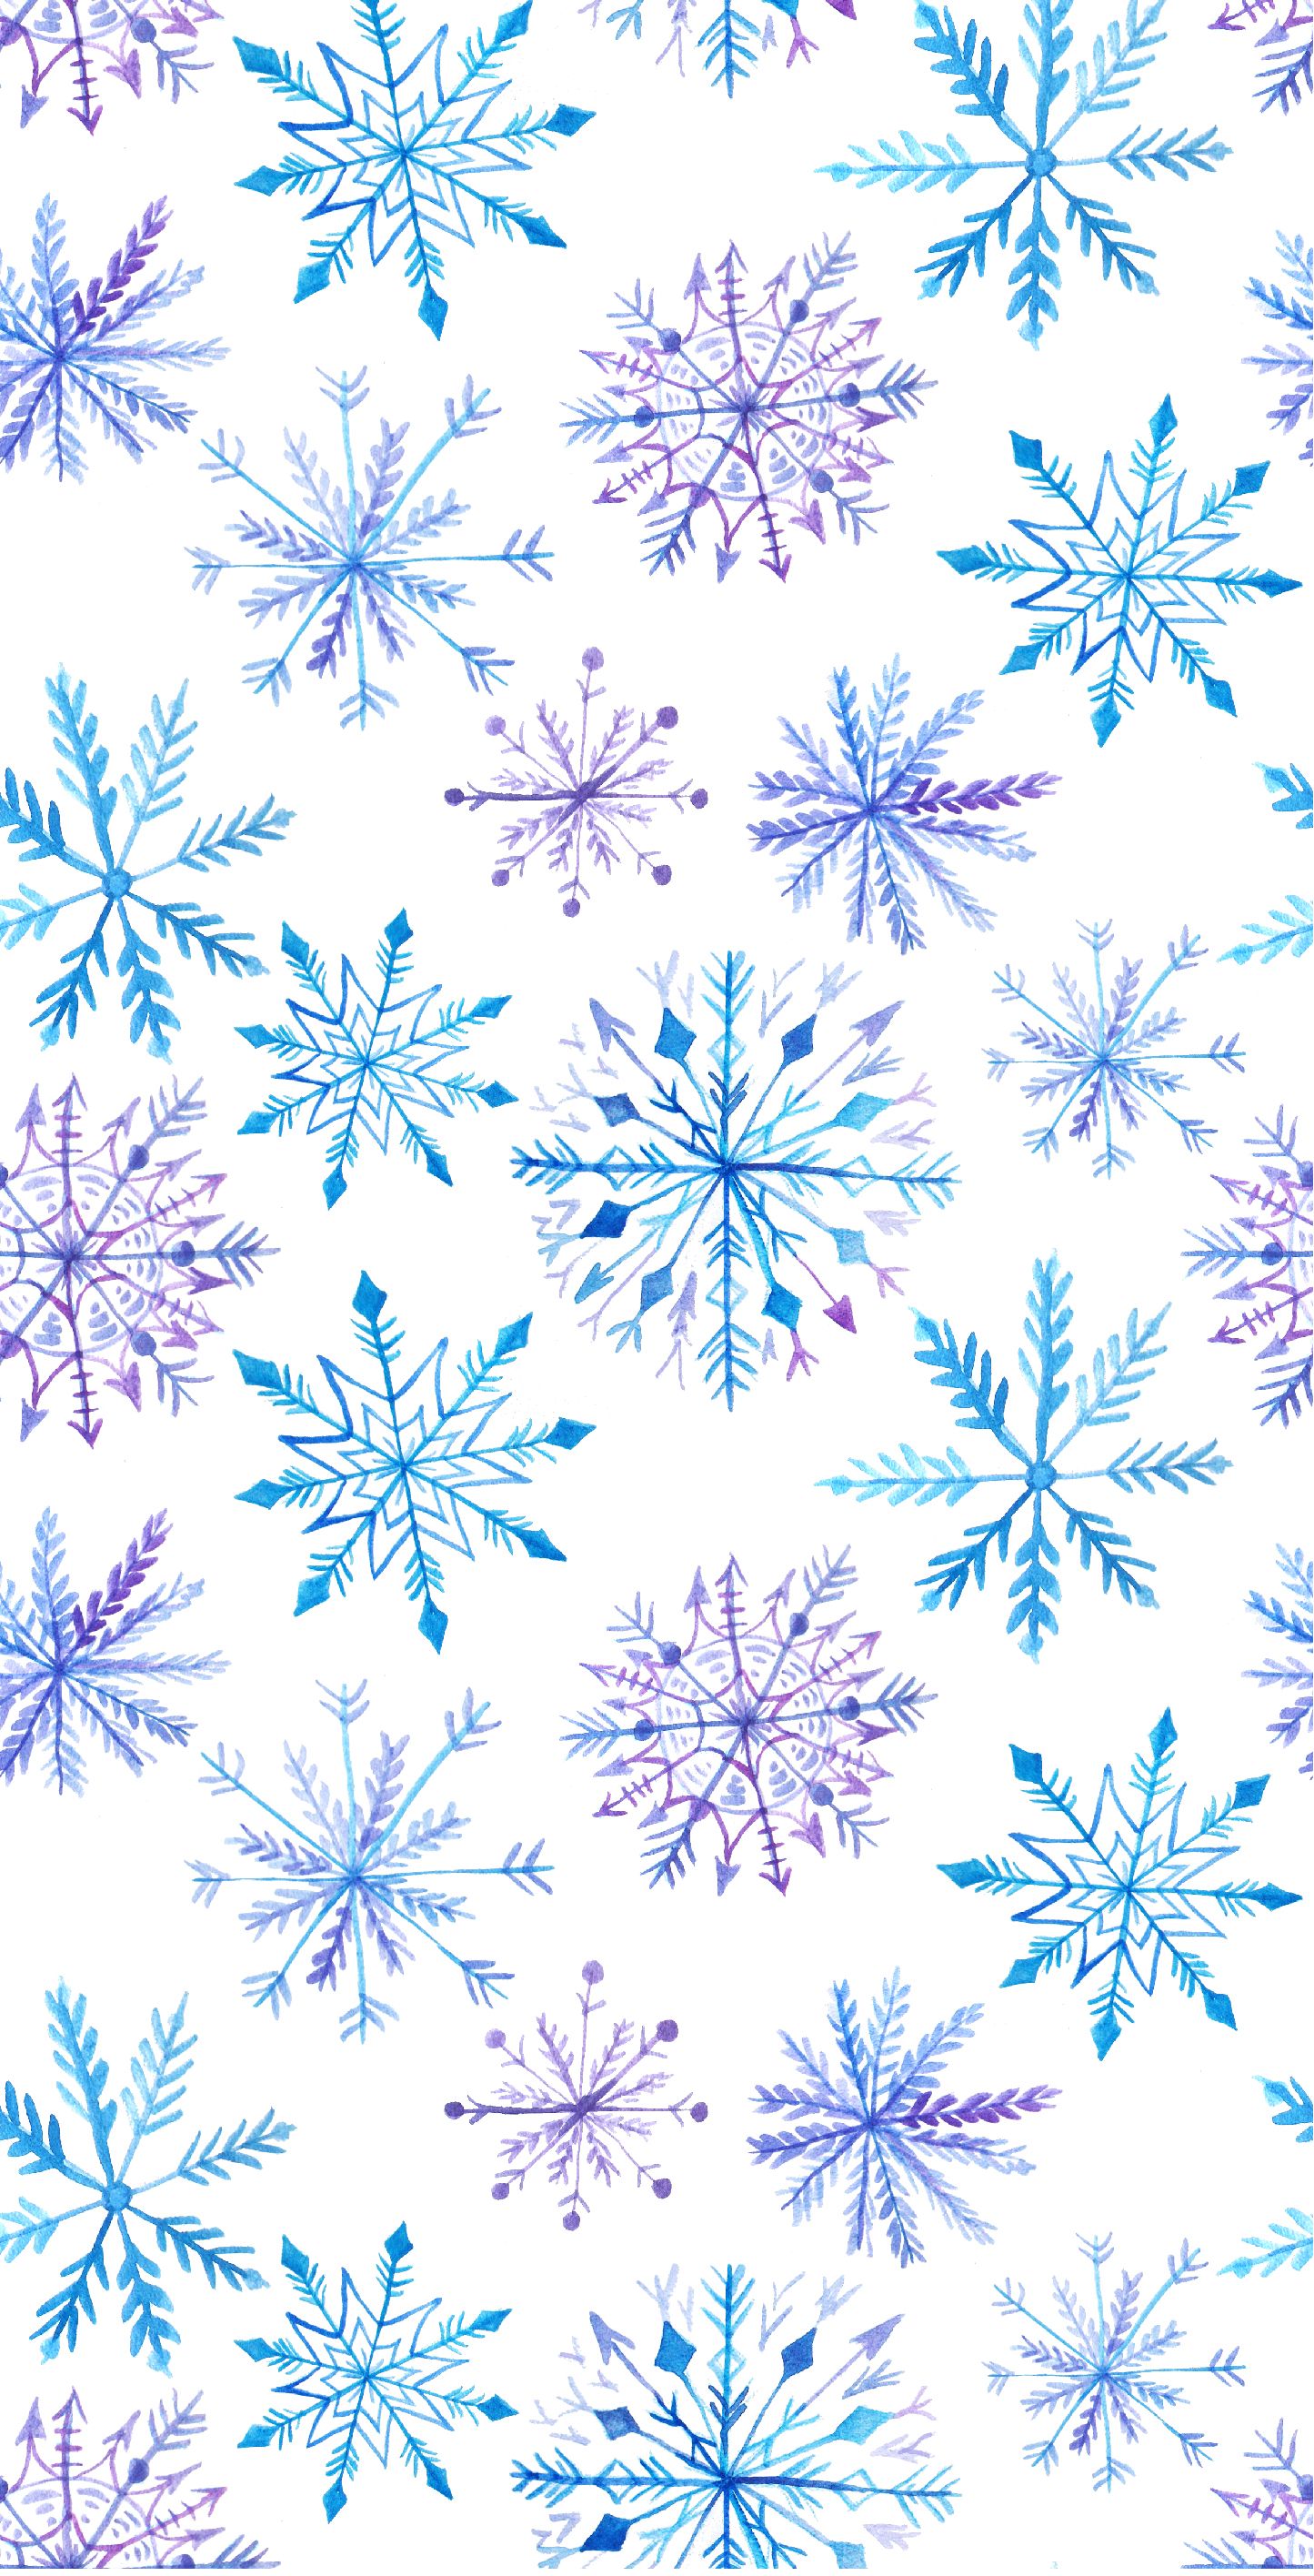 60+ FREE Aesthetic Christmas Wallpapers For A Festive Phone